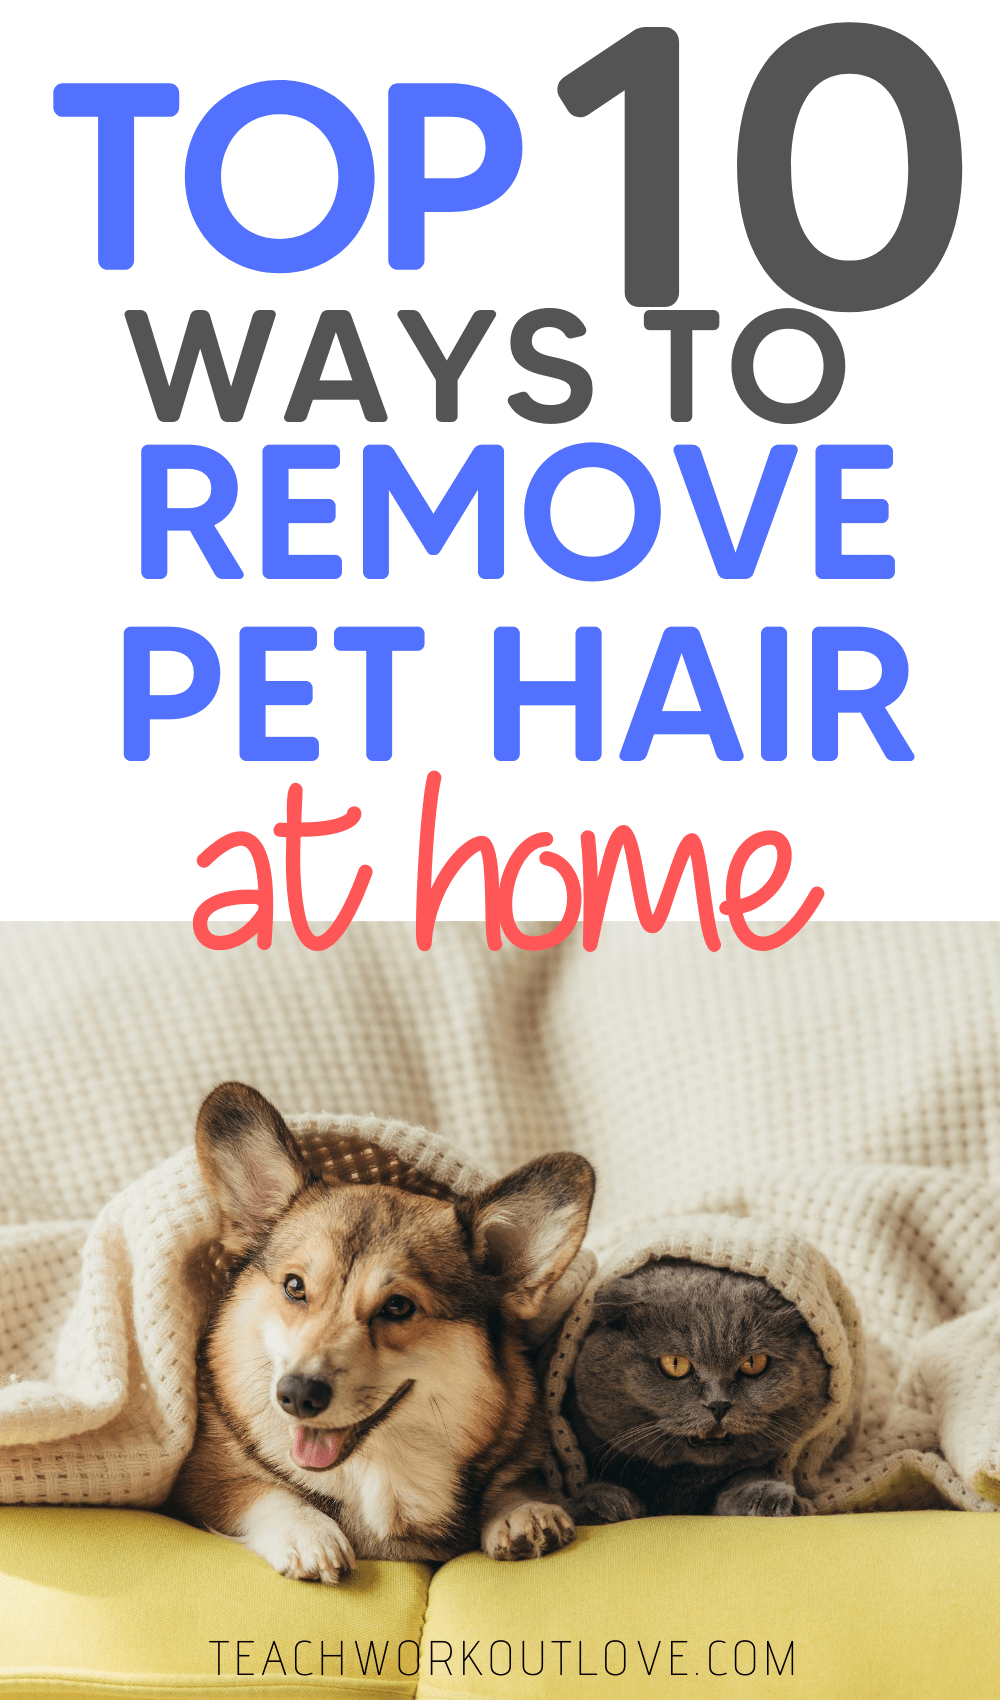 If you’re a pet owner, you know how annoying shedding can be. In this article we provide the 10 most effective ways to be pet hair free at home.